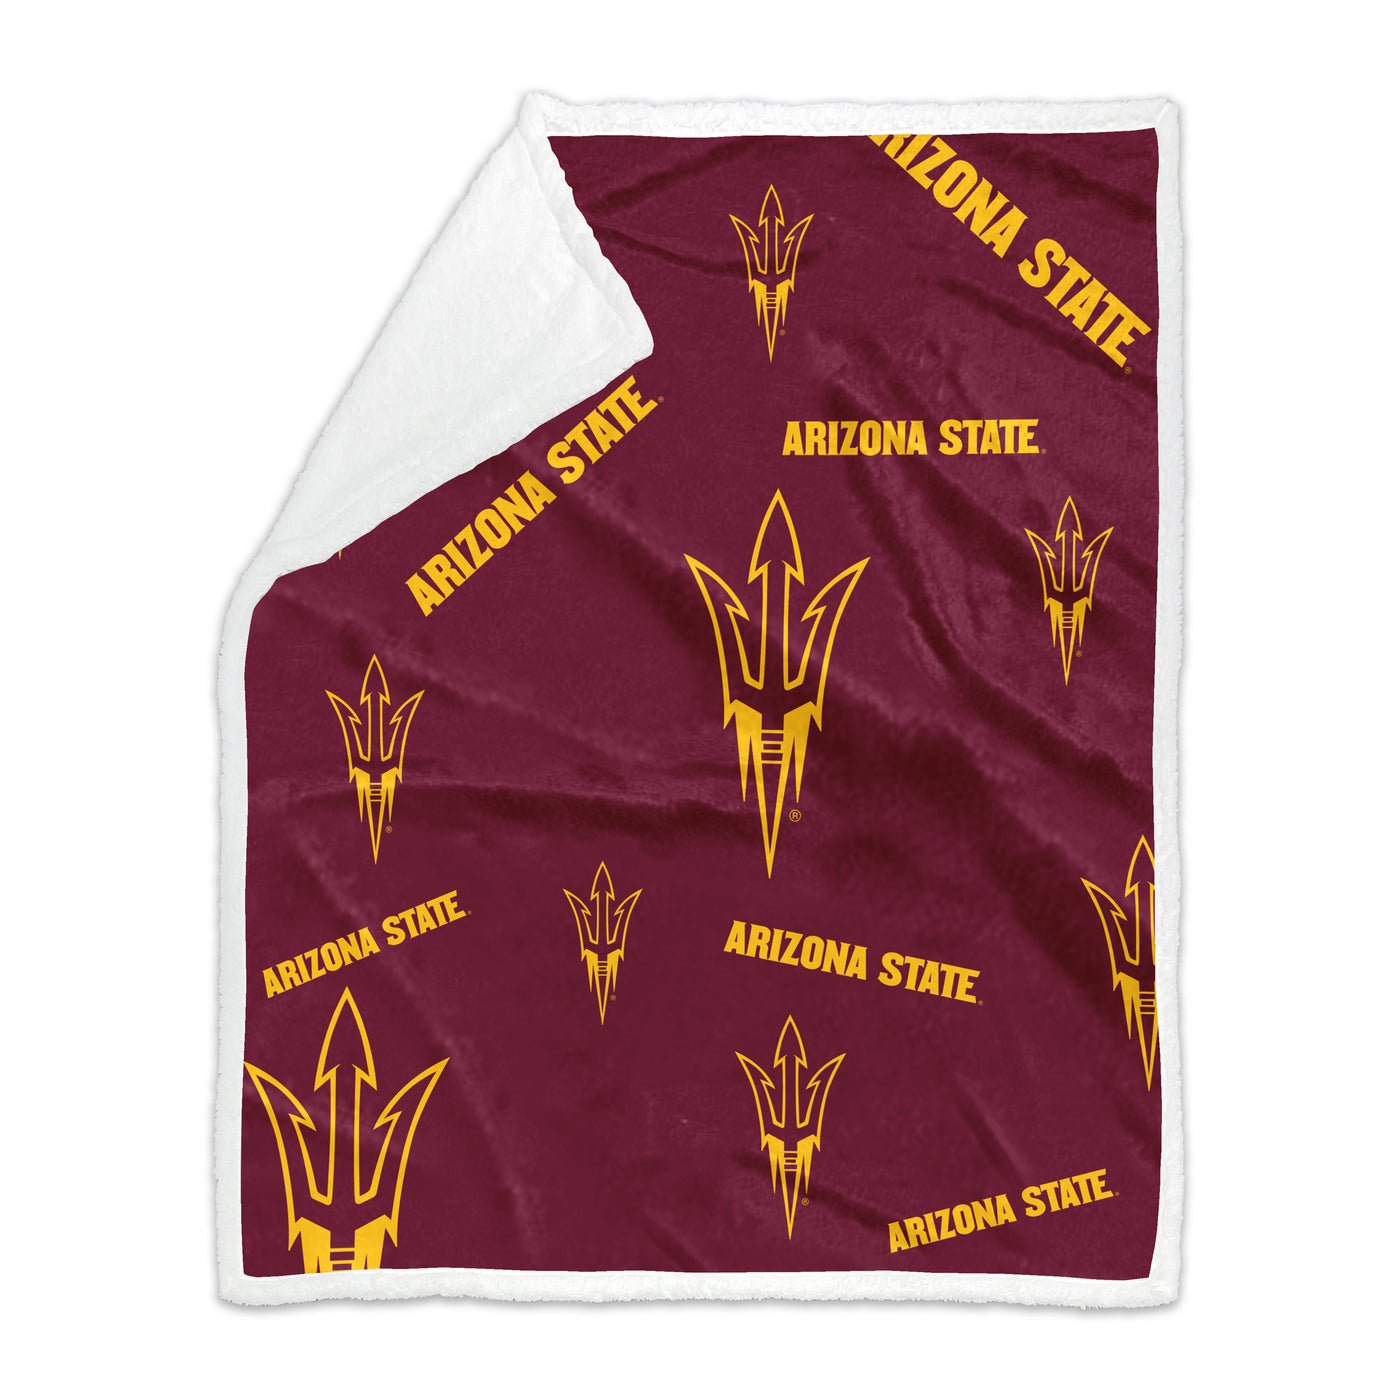 ASU maroon blanket with the pitchfork logo and text 